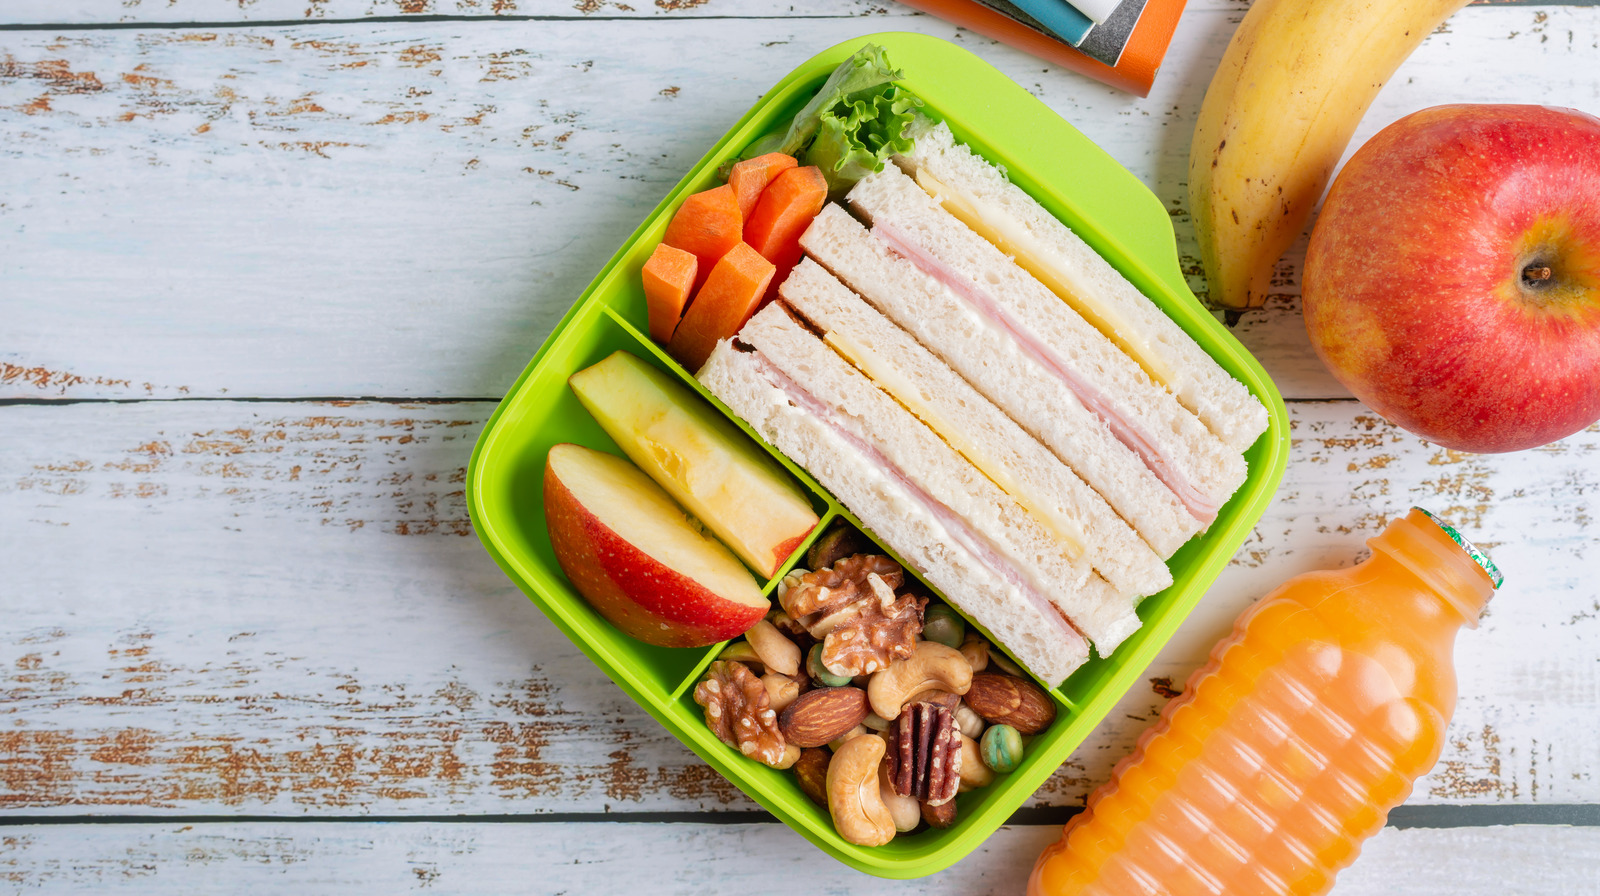 How To Keep Food Cold In A Lunch Box